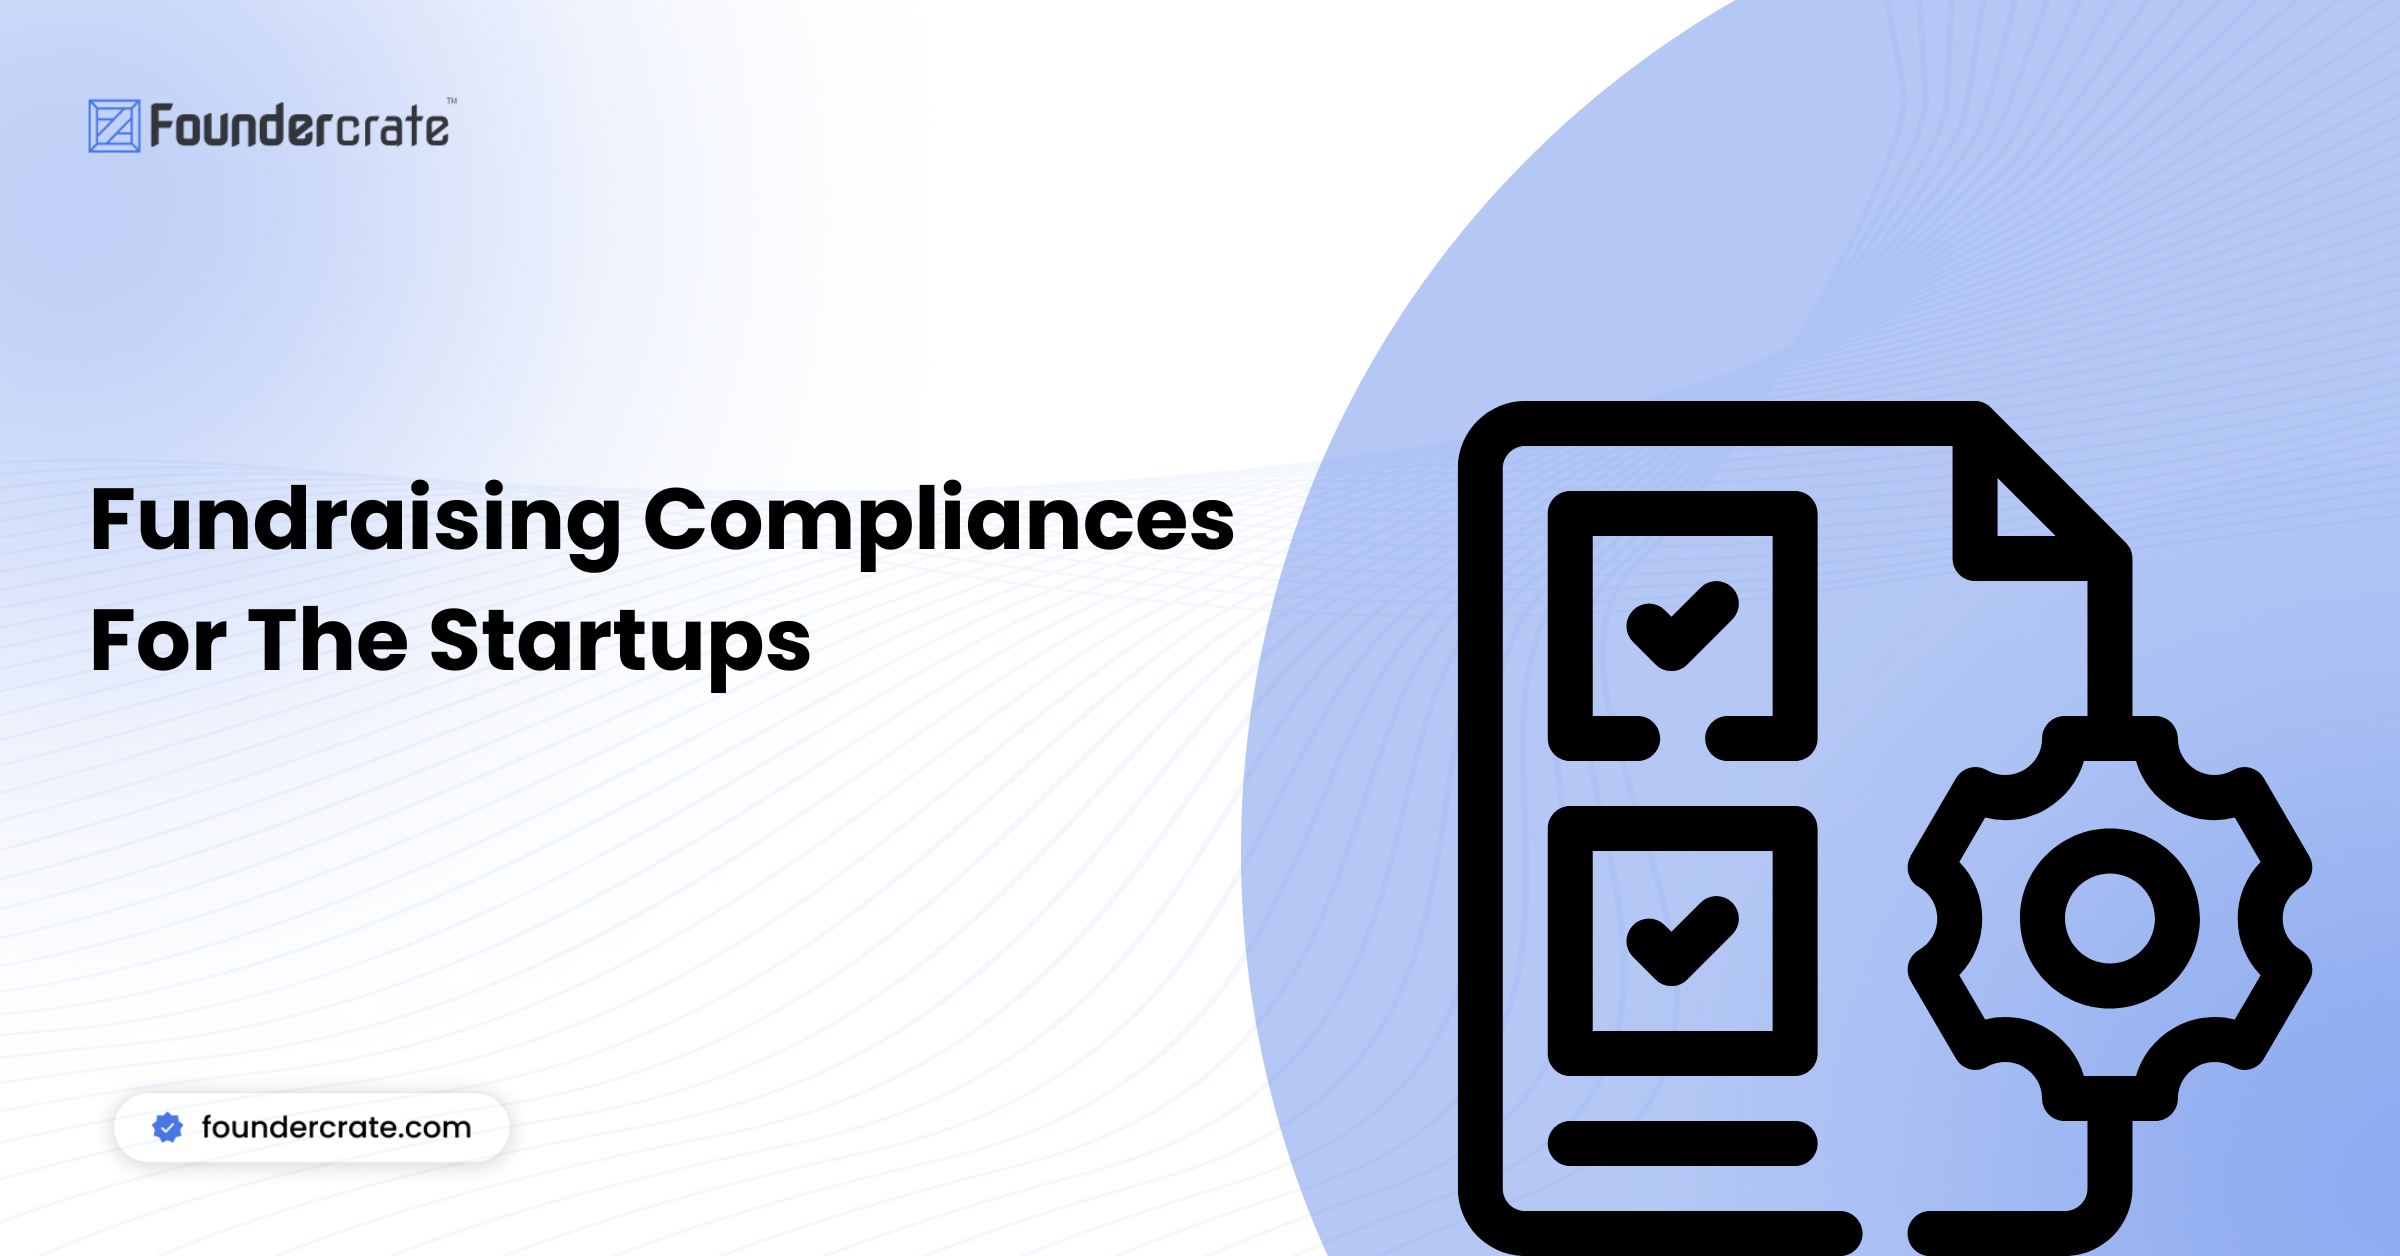 Fundraising Compliances For The Startups